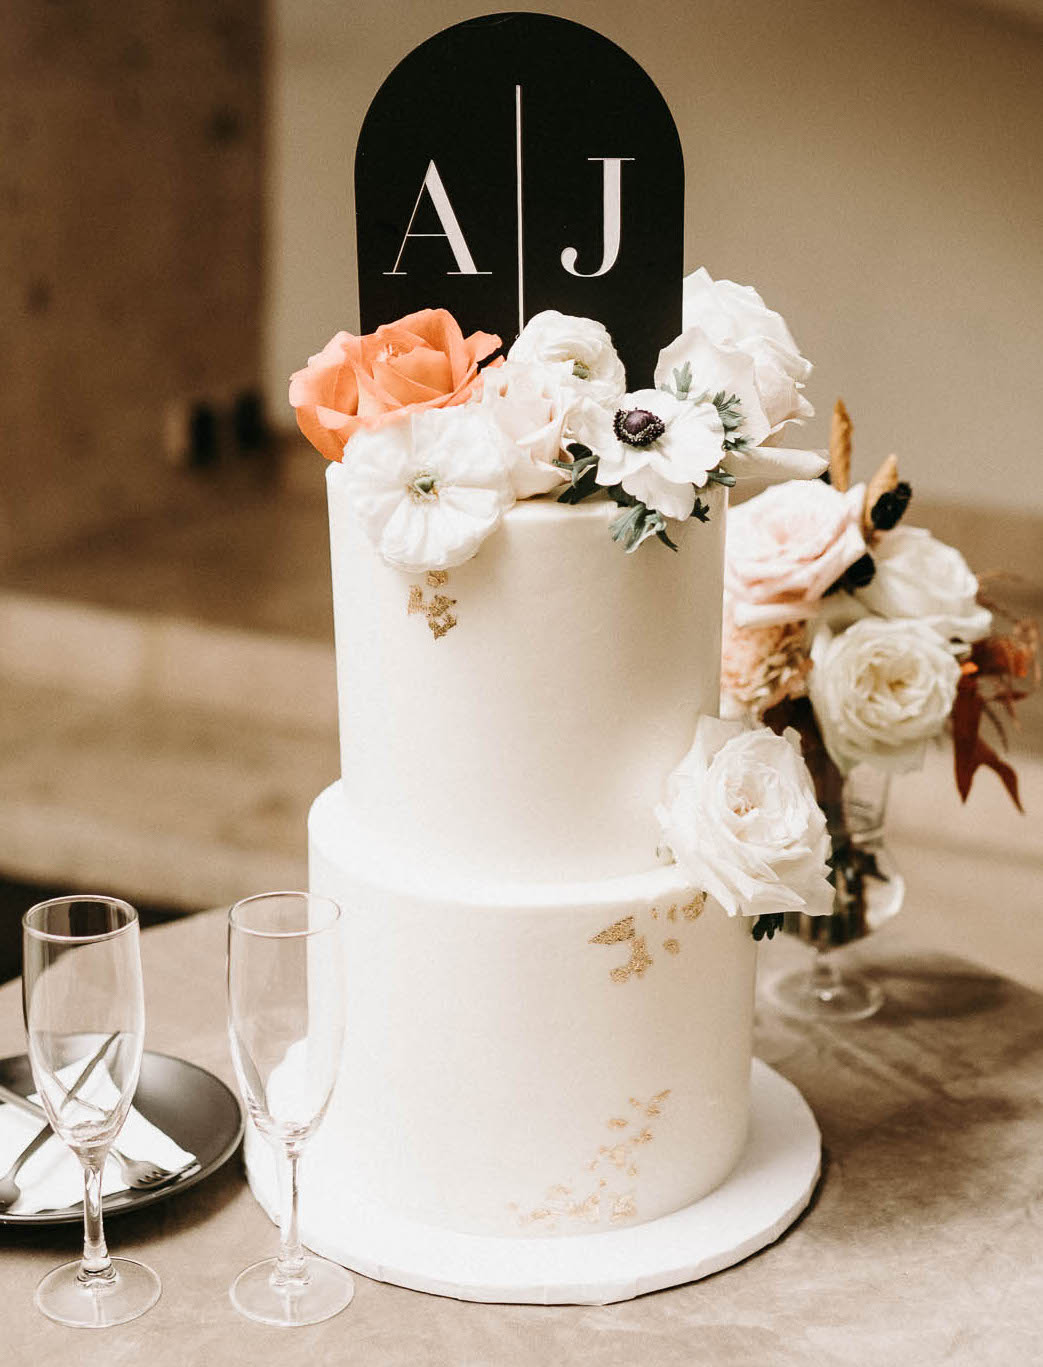 A two-tier white wedding cake with gold flakes and white and peach cake flowers with a black cake topper with the bride and groom's initials.